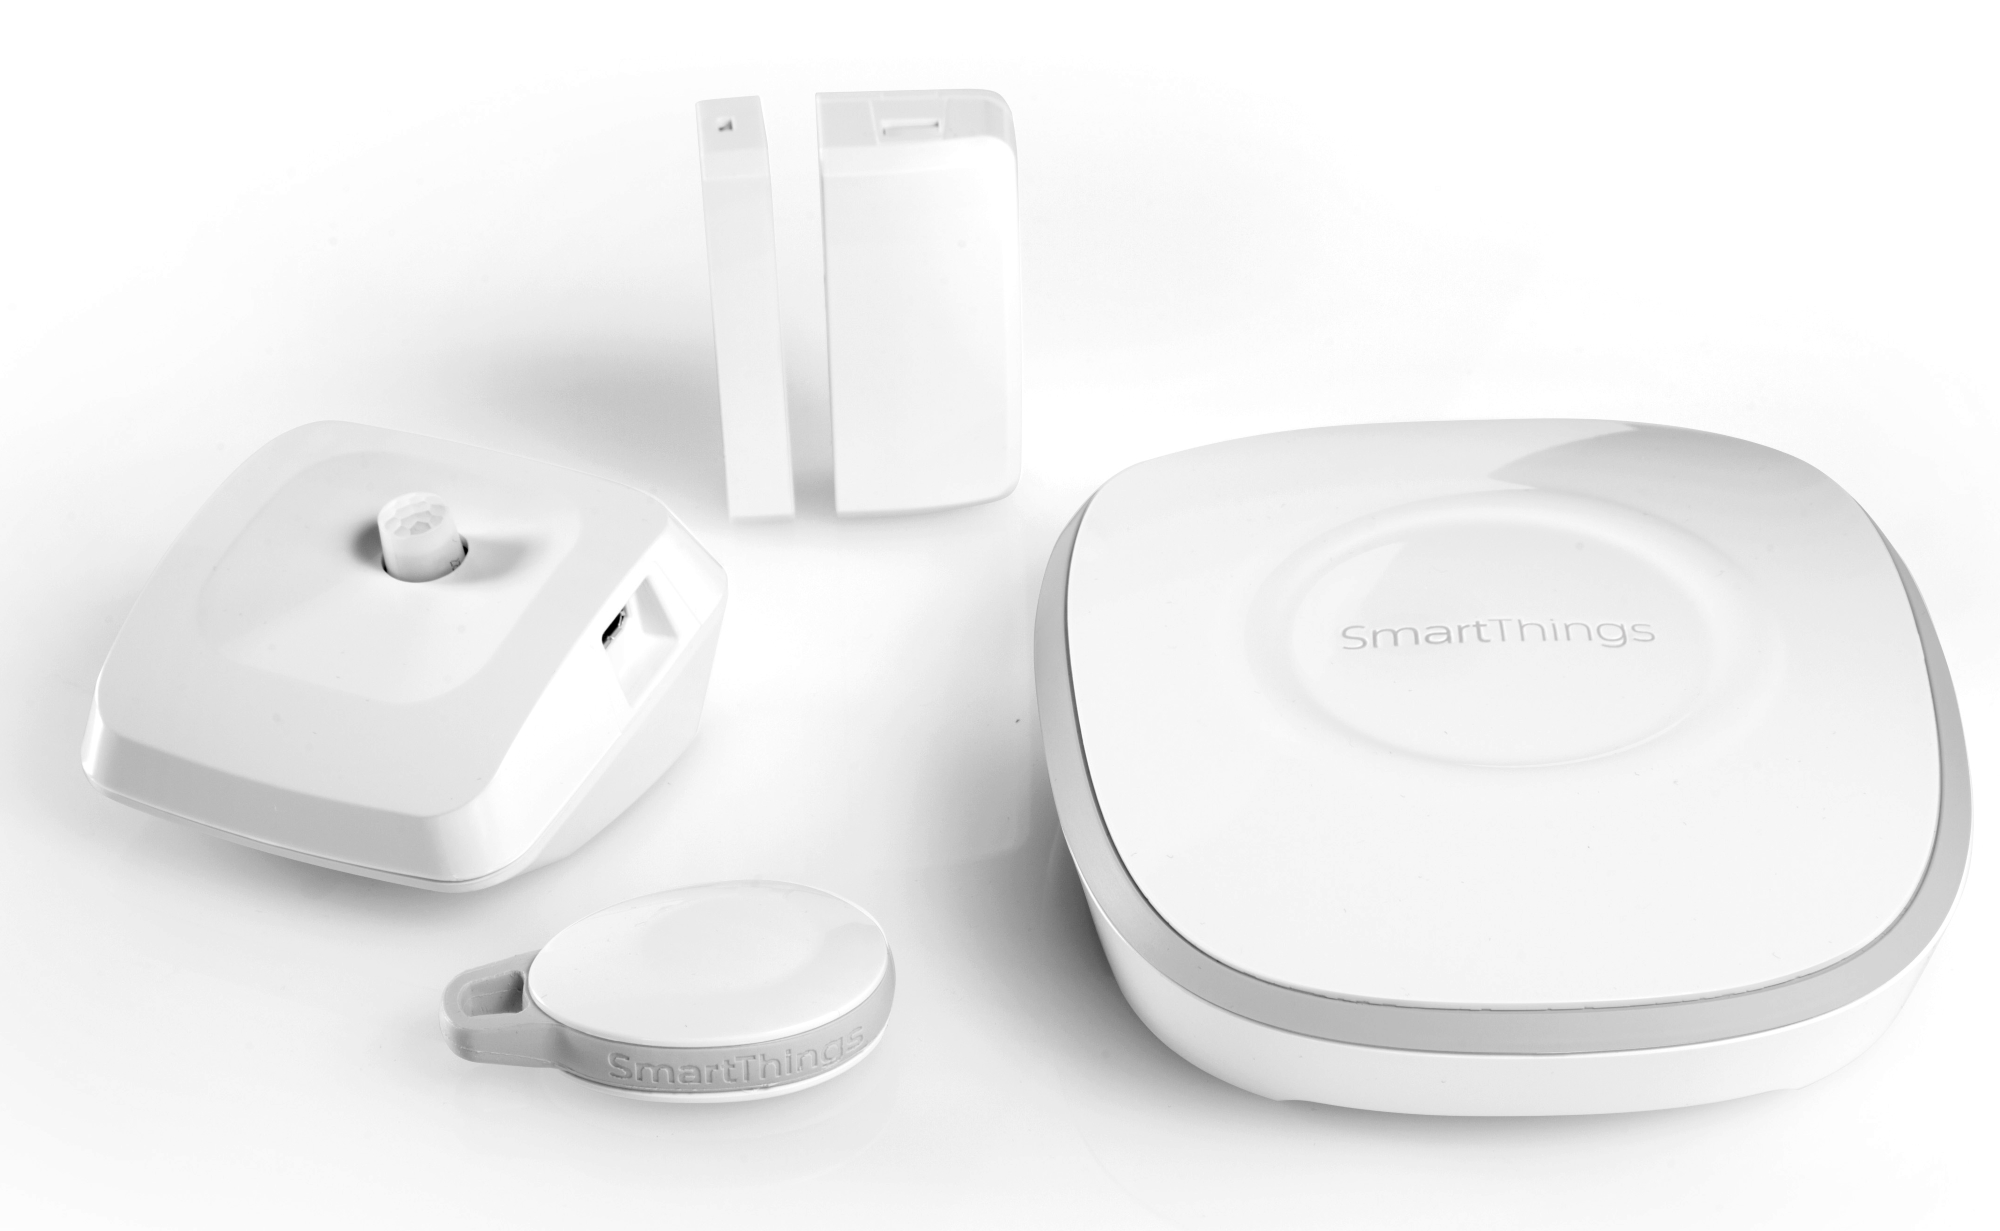 Samsung Set to Acquire Connected Home Firm SmartThings